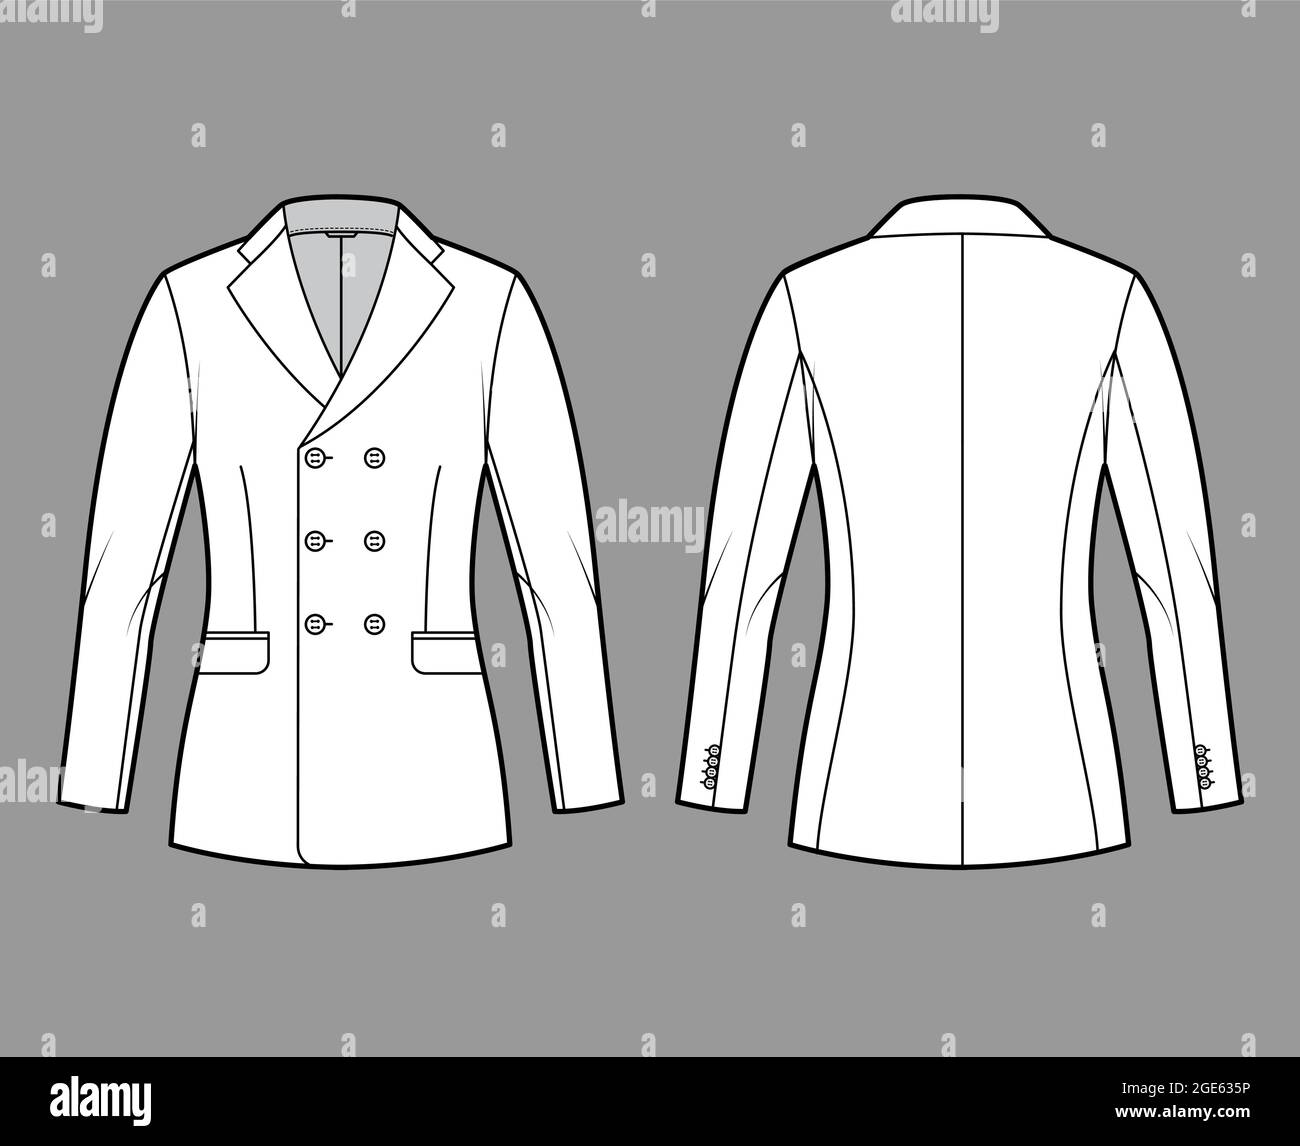 Fitted jacket suit technical fashion illustration with double breasted, notched lapel collar, flap pockets, hip length. Flat Blazer coat template front, back, white color. Women, men unisex CAD mockup Stock Vector